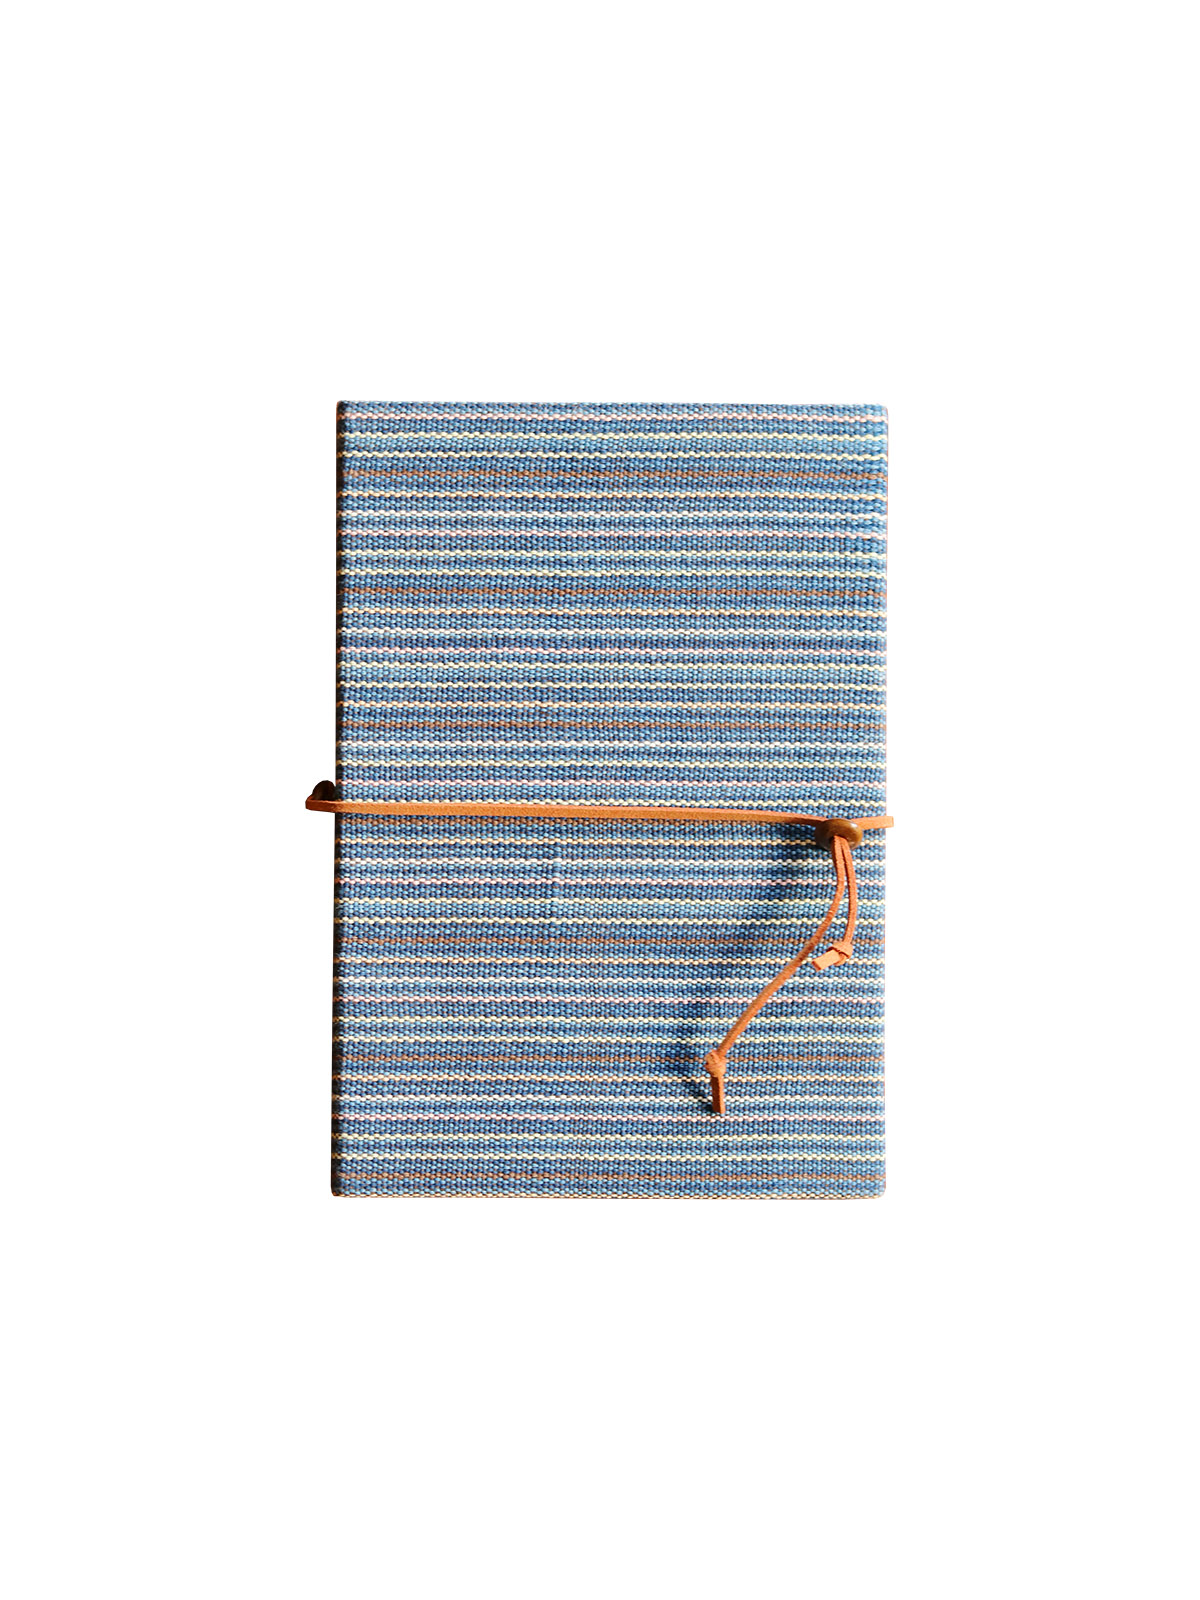 Blue Handcrafted Notebook with Handwoven Cotton Cover and Leather Strap - Mitzie Mee Shop